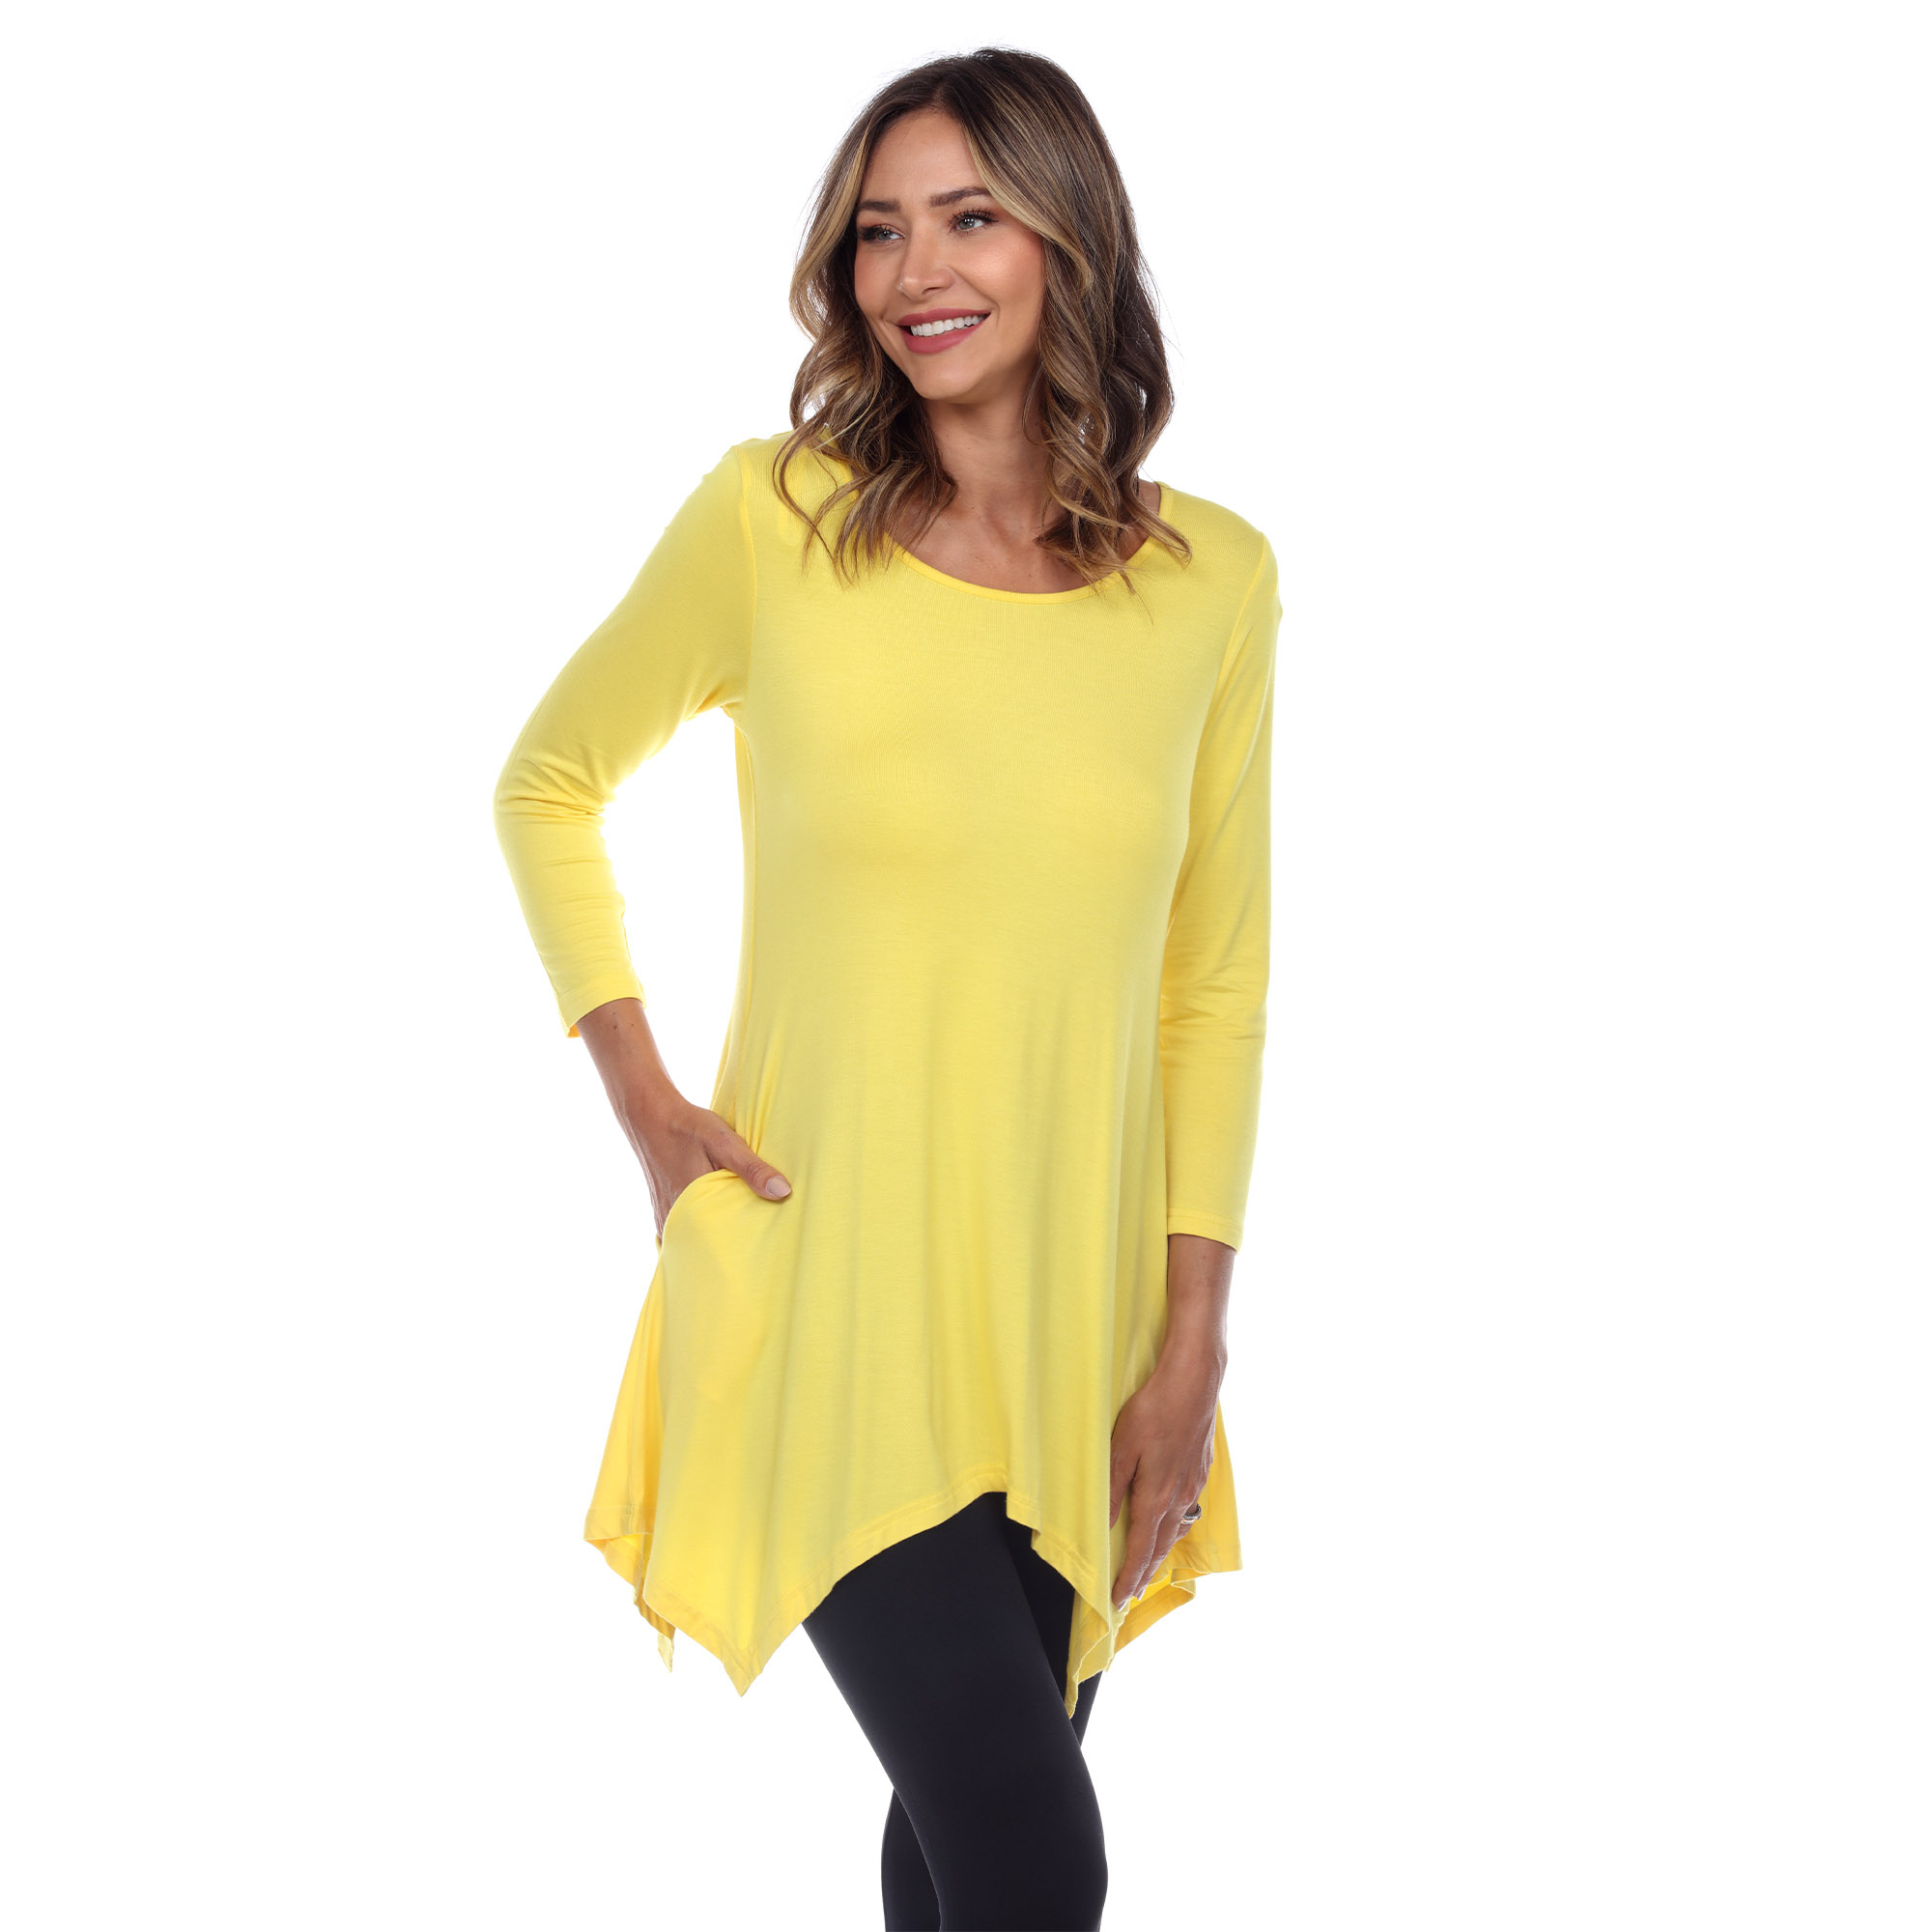 White Mark Women's Quarter Sleeve Tunic Top With Pockets - Yellow, 2X